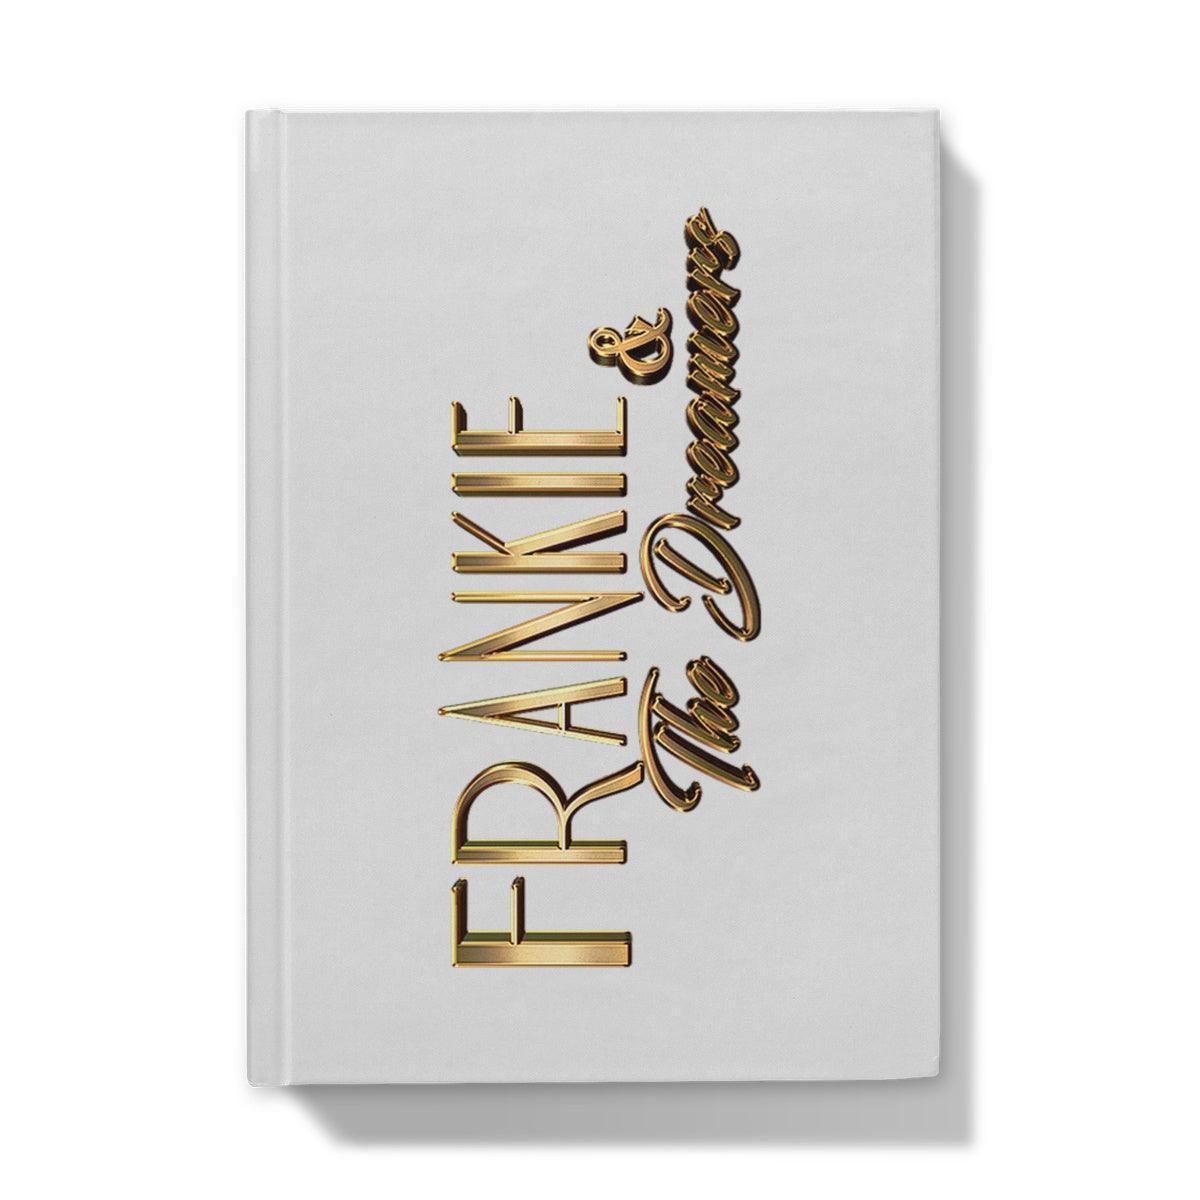 Frankie And The Dreamers Hardback Journal | Stationery 5"x7" Lined